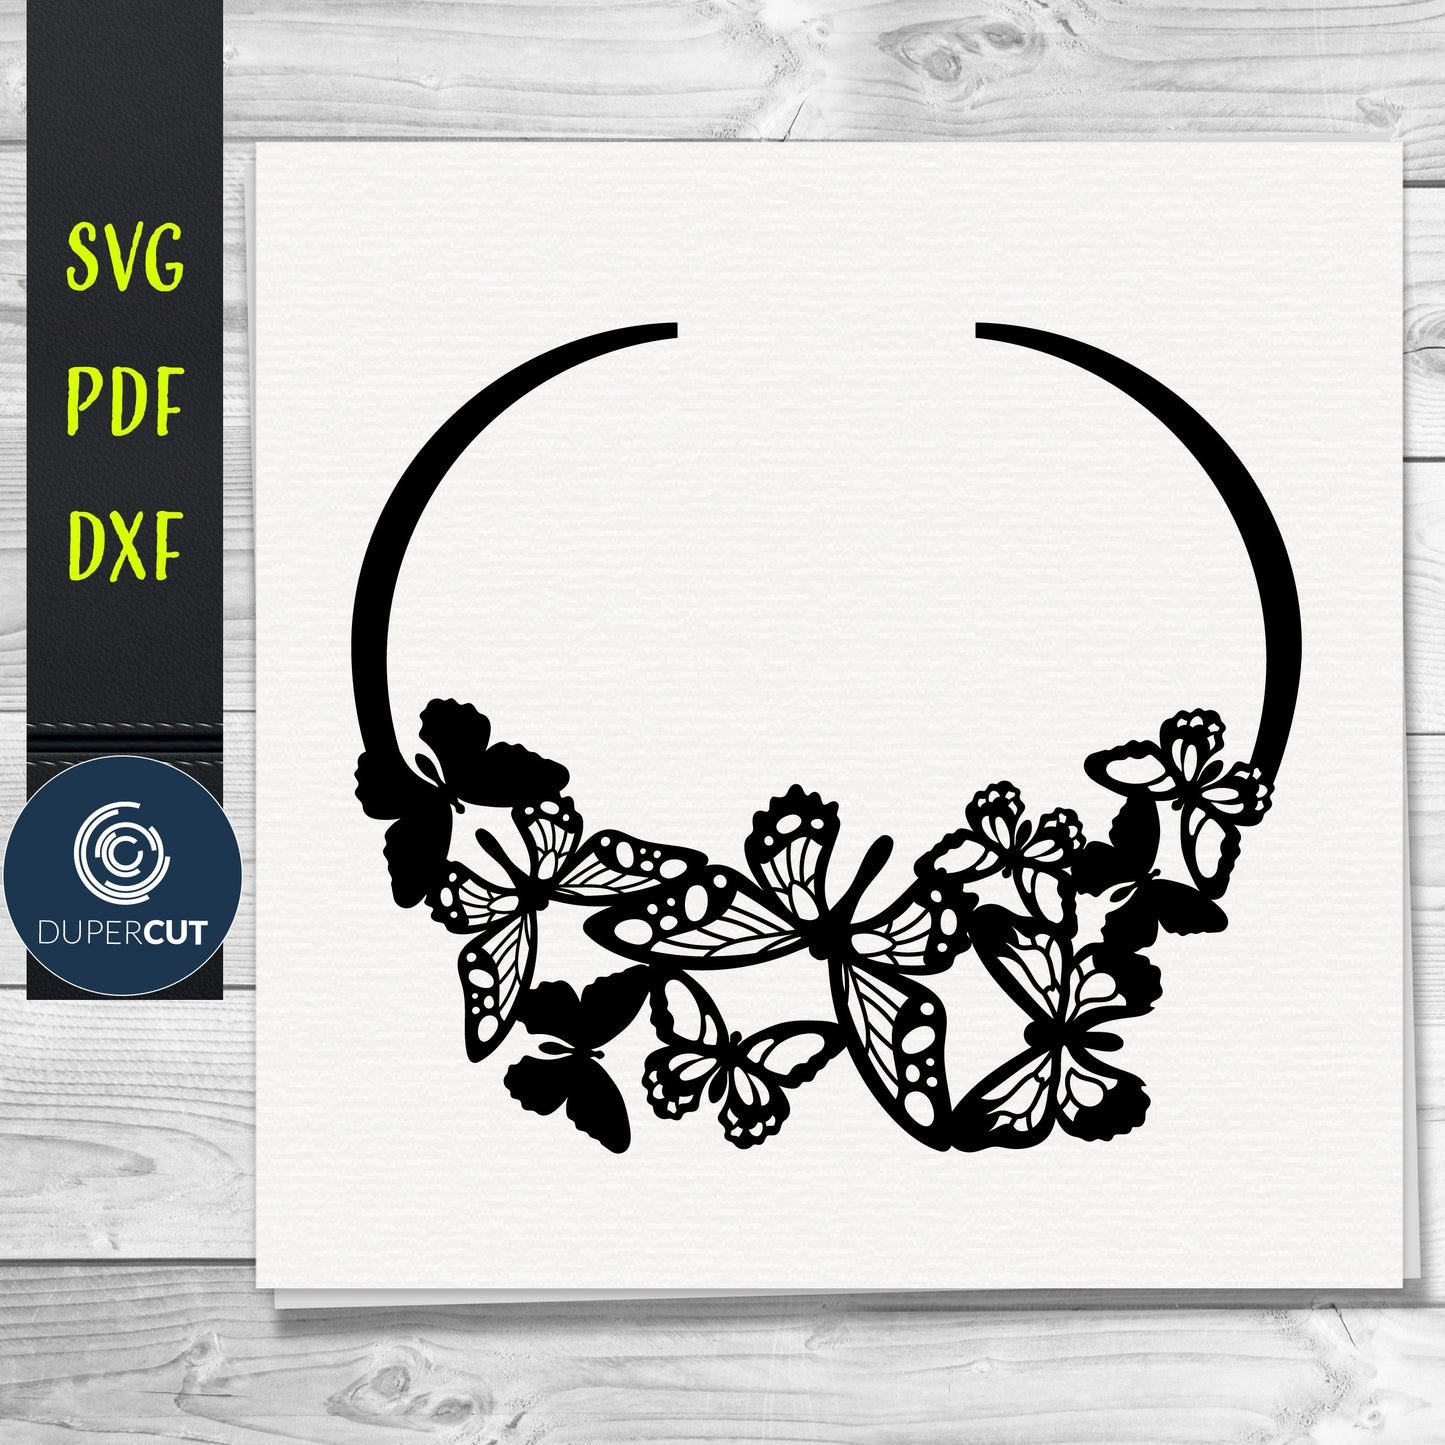 Butterfly Leather Necklace SVG PDF DXF vector files. Jewellery making template for laser and cutting machines - Glowforge, Cricut, Silhouette Cameo.